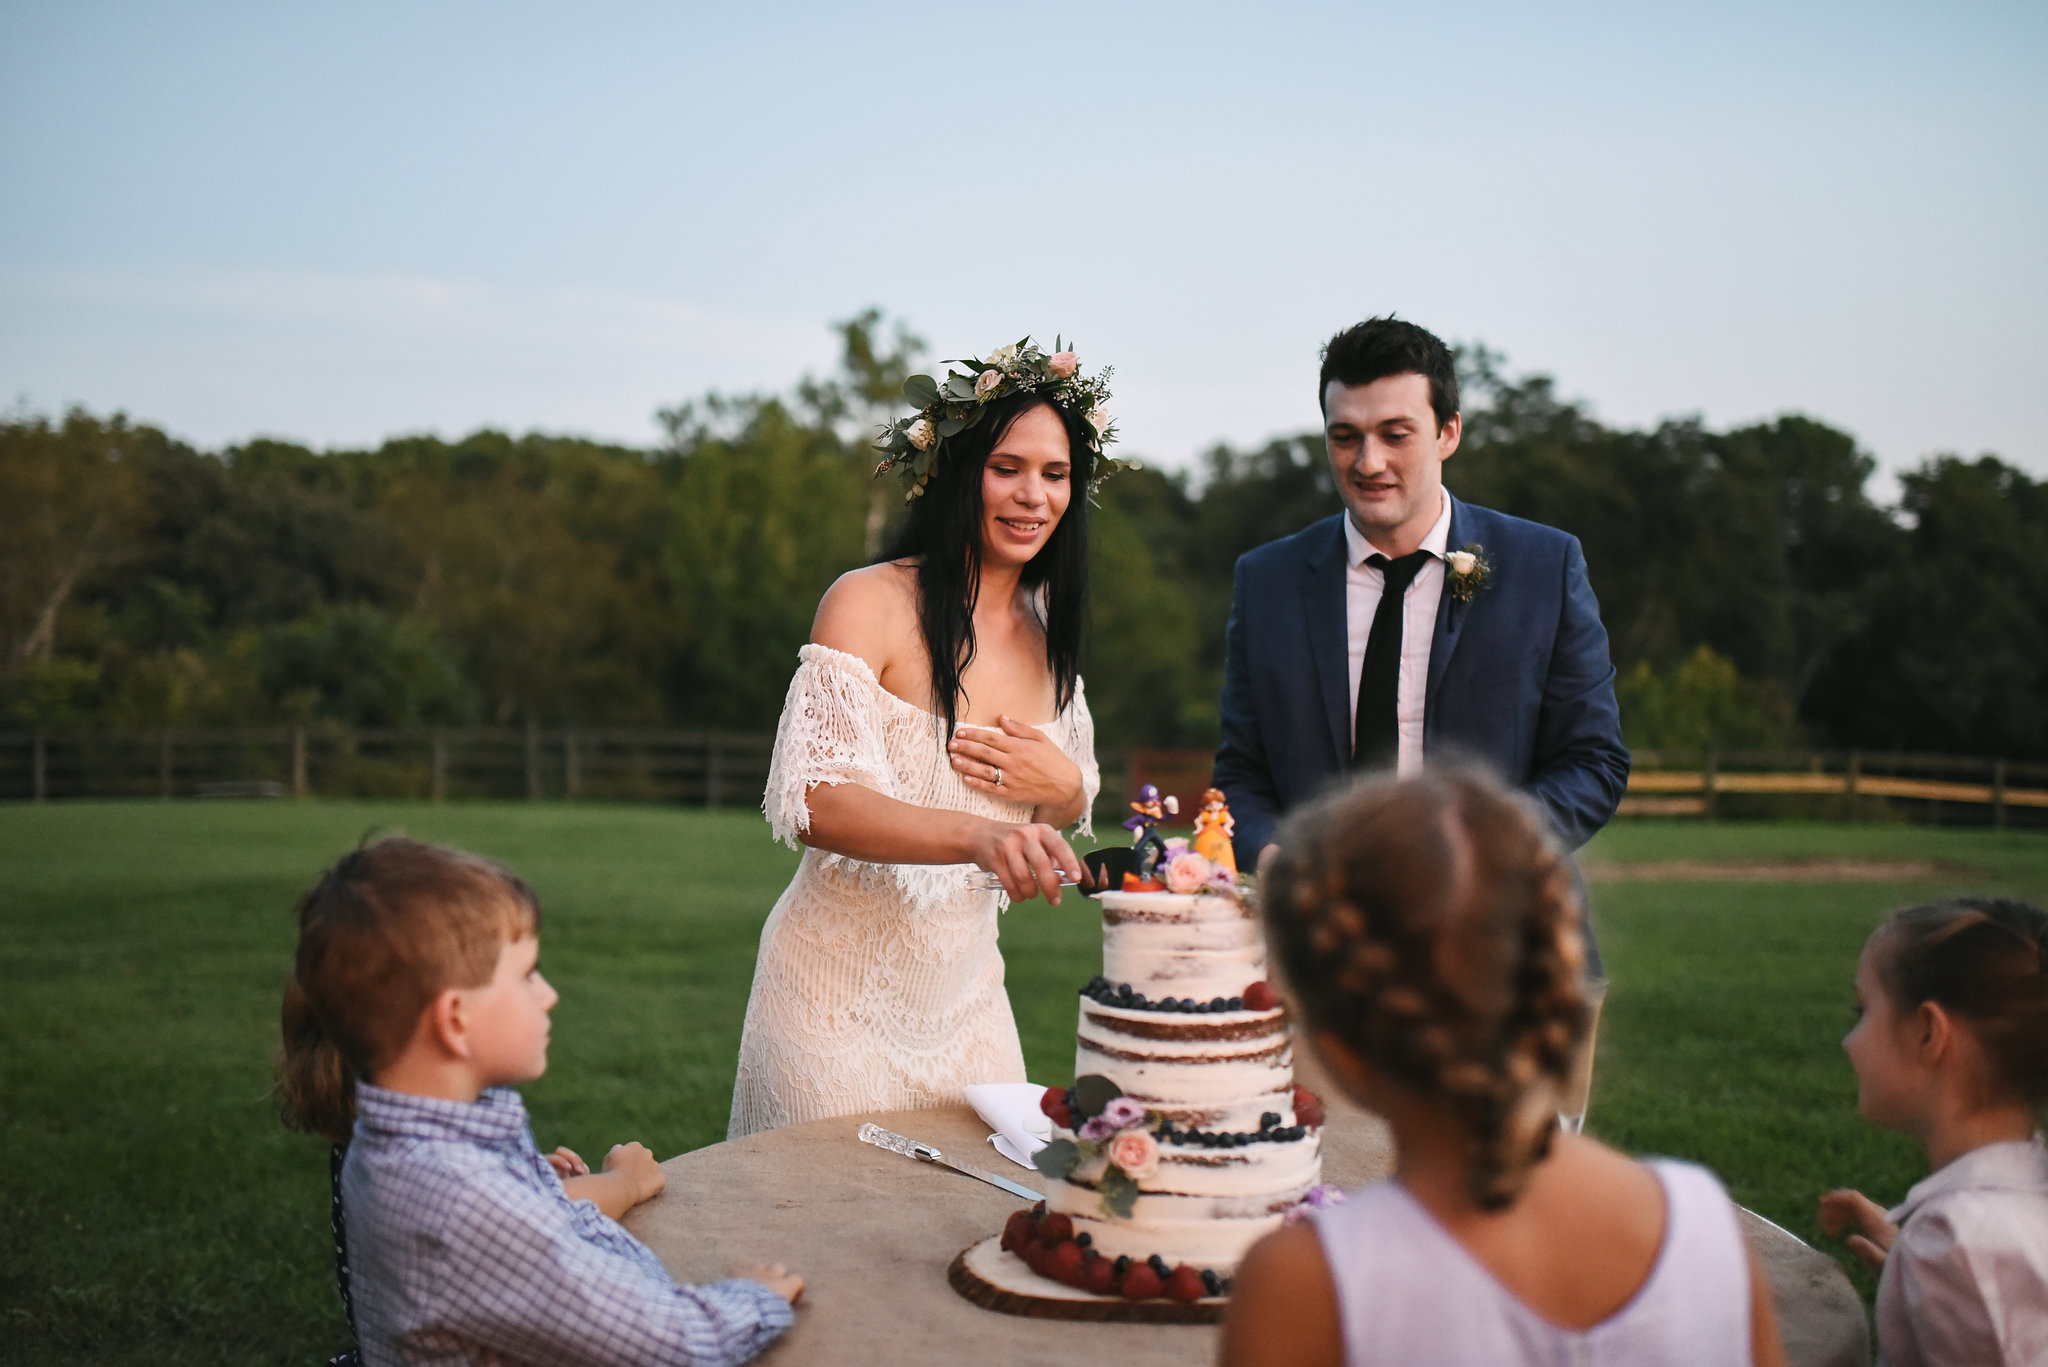  Maryland, Eastern Shore, Baltimore Wedding Photographer, Romantic, Boho, Backyard Wedding, Nature, Bride and Groom Cutting the Cake While Kids Watch, Honey Hive Bakery, Flower Crown, Outdoor Reception 